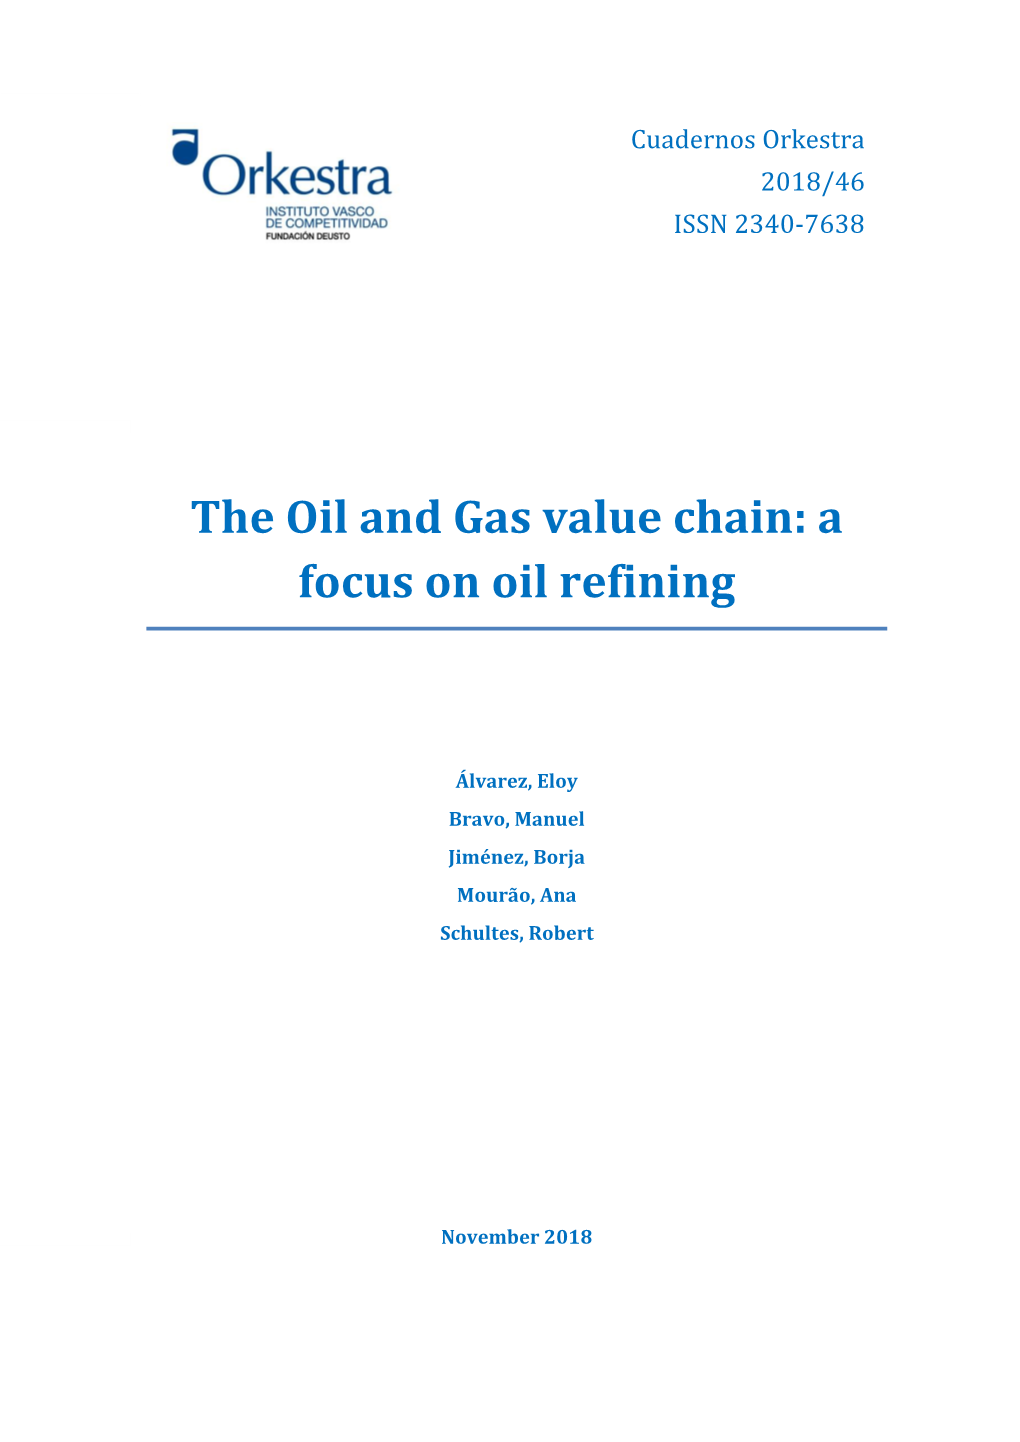 The Oil and Gas Value Chain: a Focus on Oil Refining